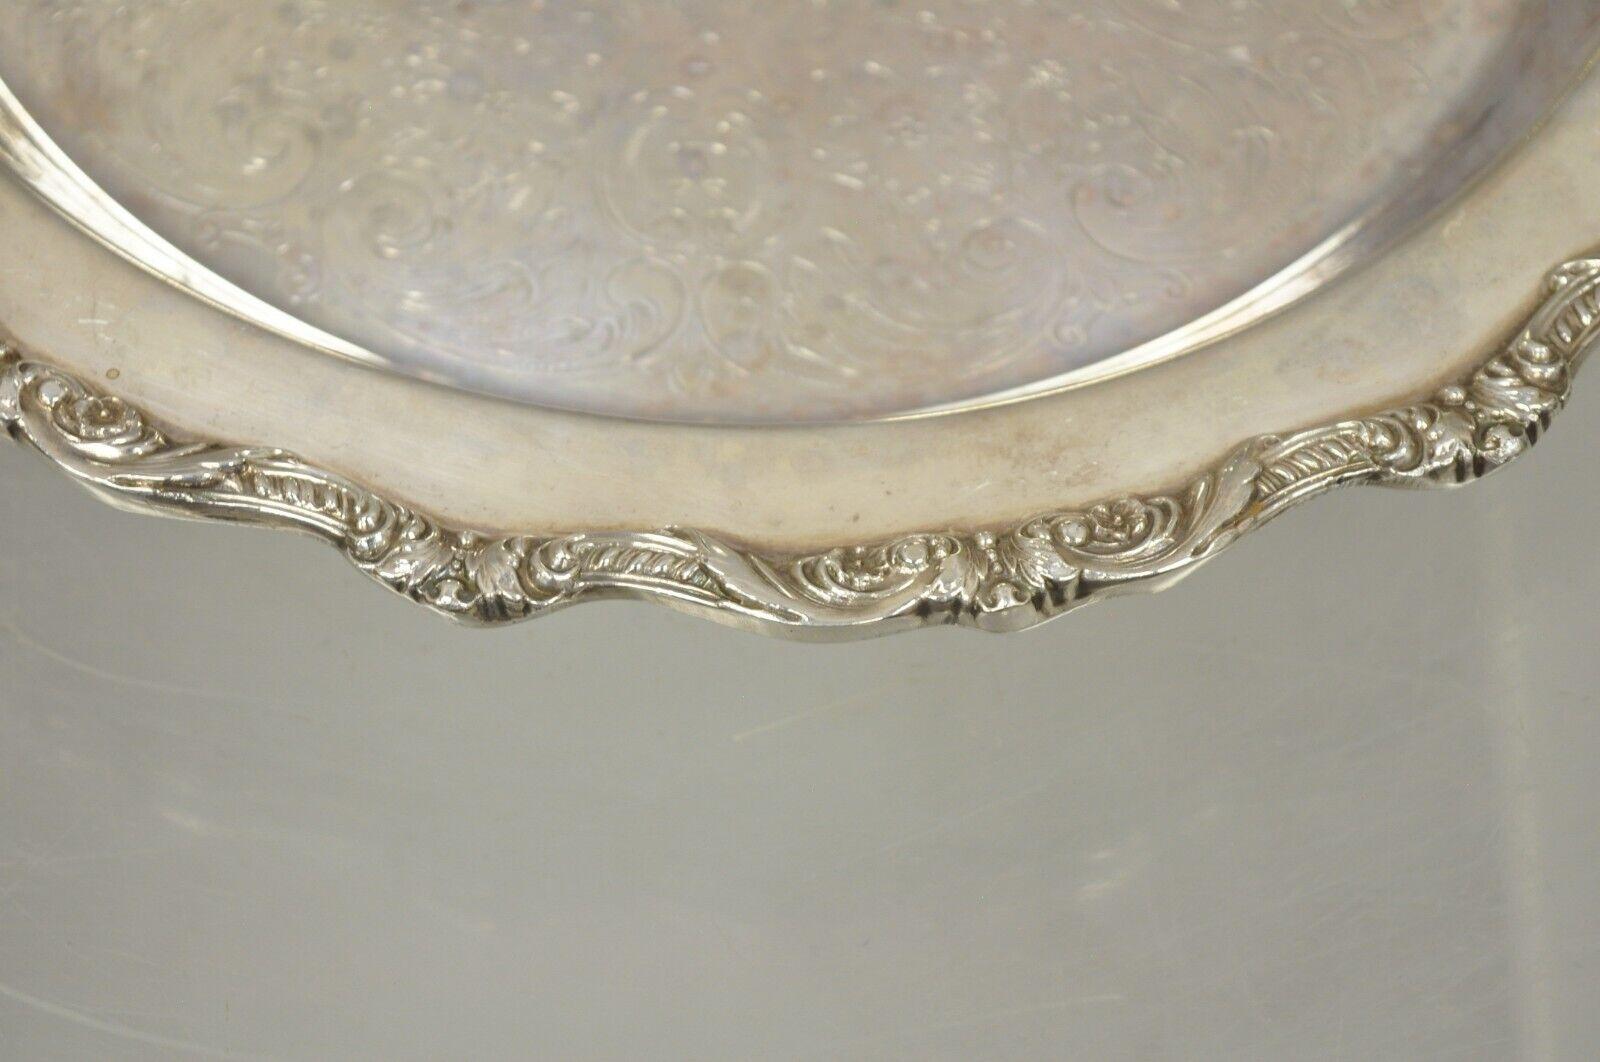 epca old english silver plate by poole